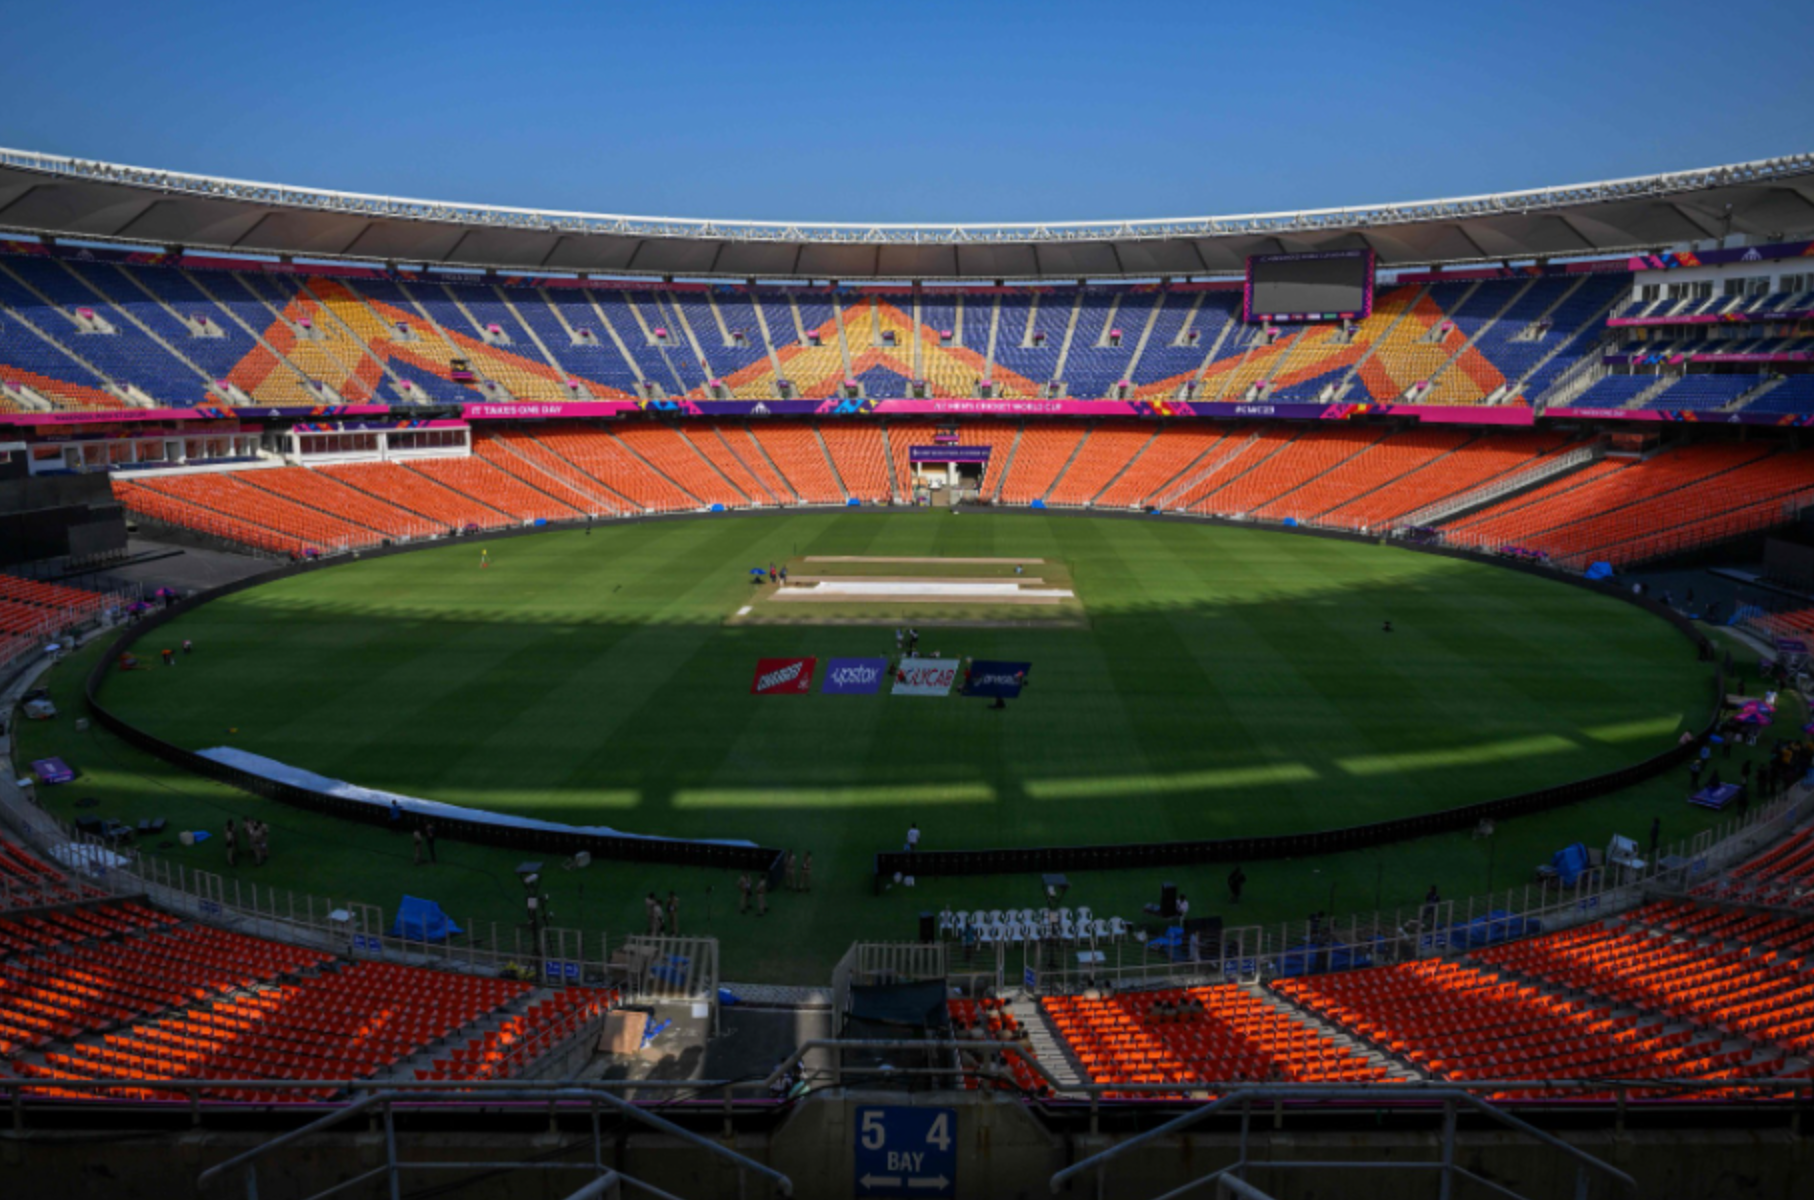 A view of the Narendra Modi Stadium ahead of the 2023 ICC men’s cricket World Cup in Ahmedabad, India